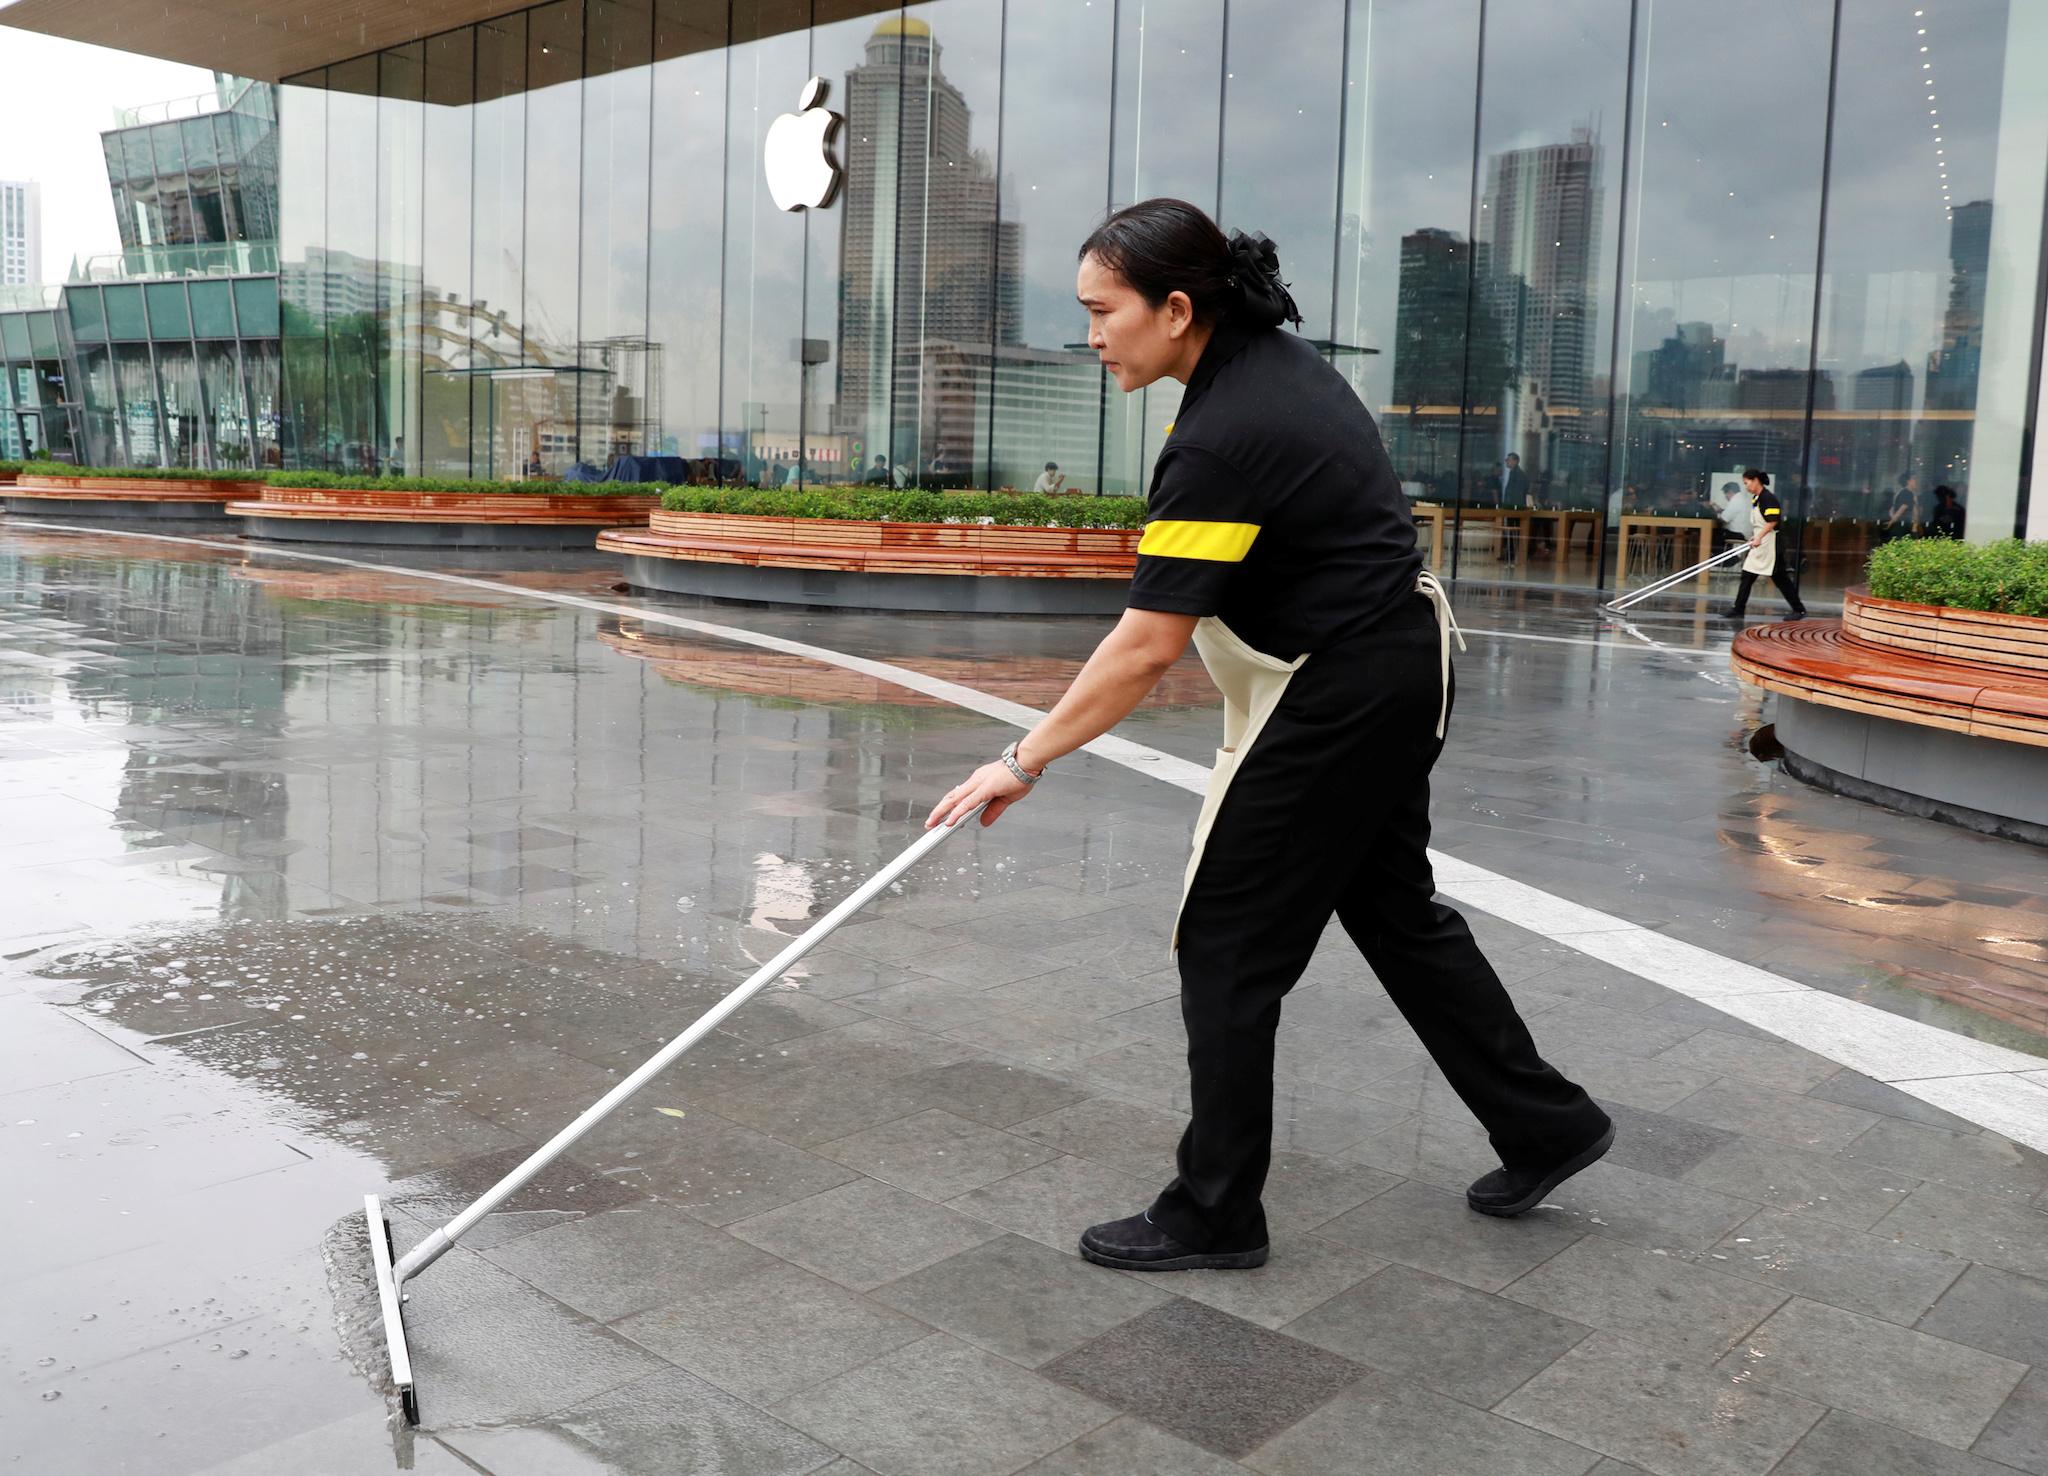 A woman cleans the wet floor near the Thailand's first flagship Apple store at Iconsiam shopping mall in Bangkok, Thailand